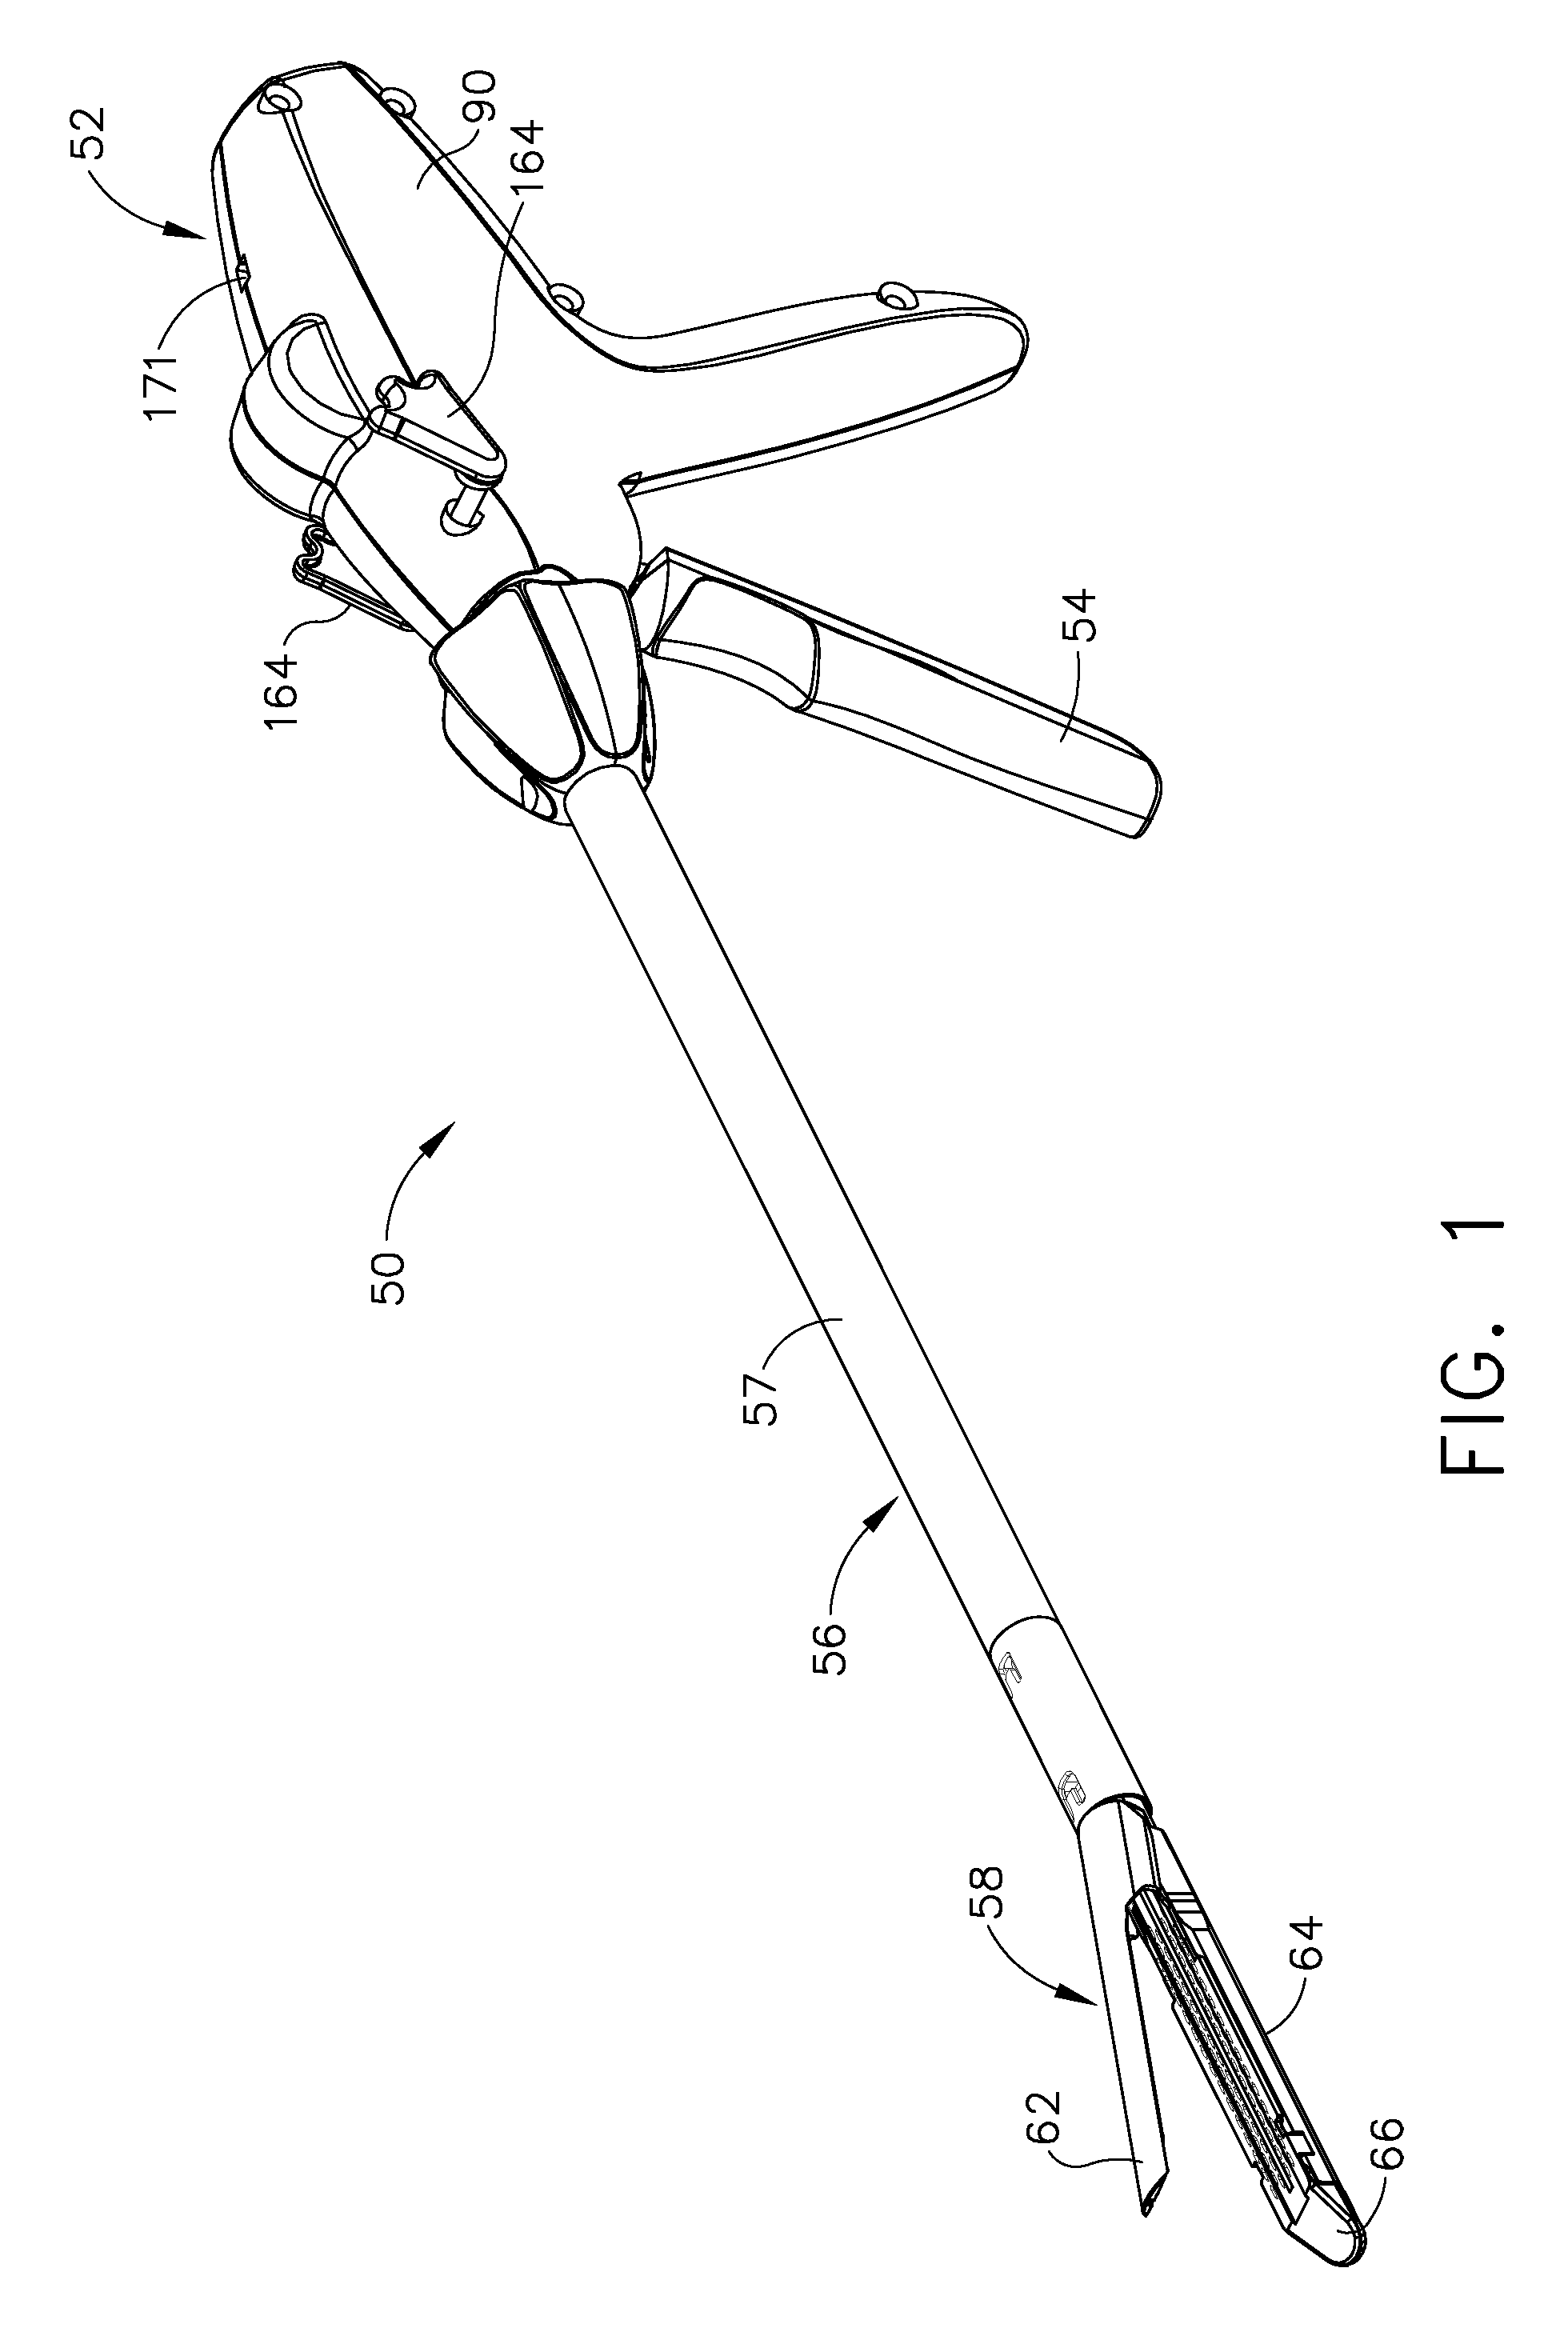 Surgical instrument having a common trigger for actuating an end effector closing system and a staple firing system